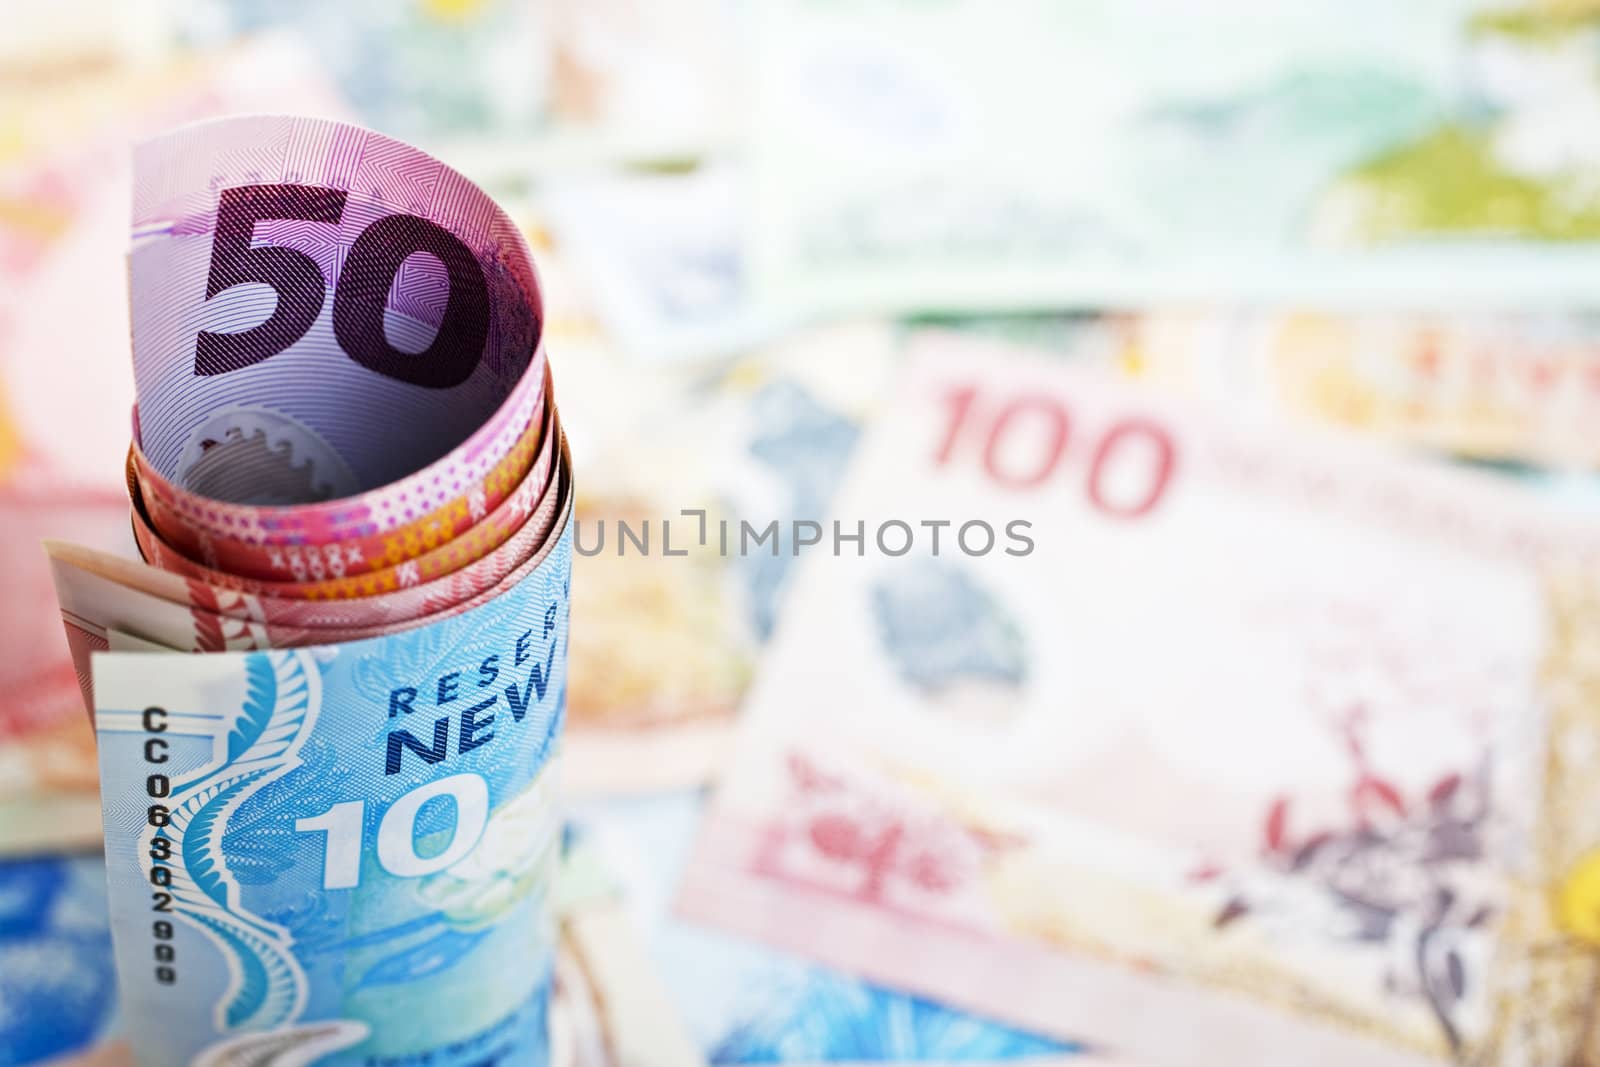 Rolled up New Zealand banknotes standing on an out of focus background of notes.